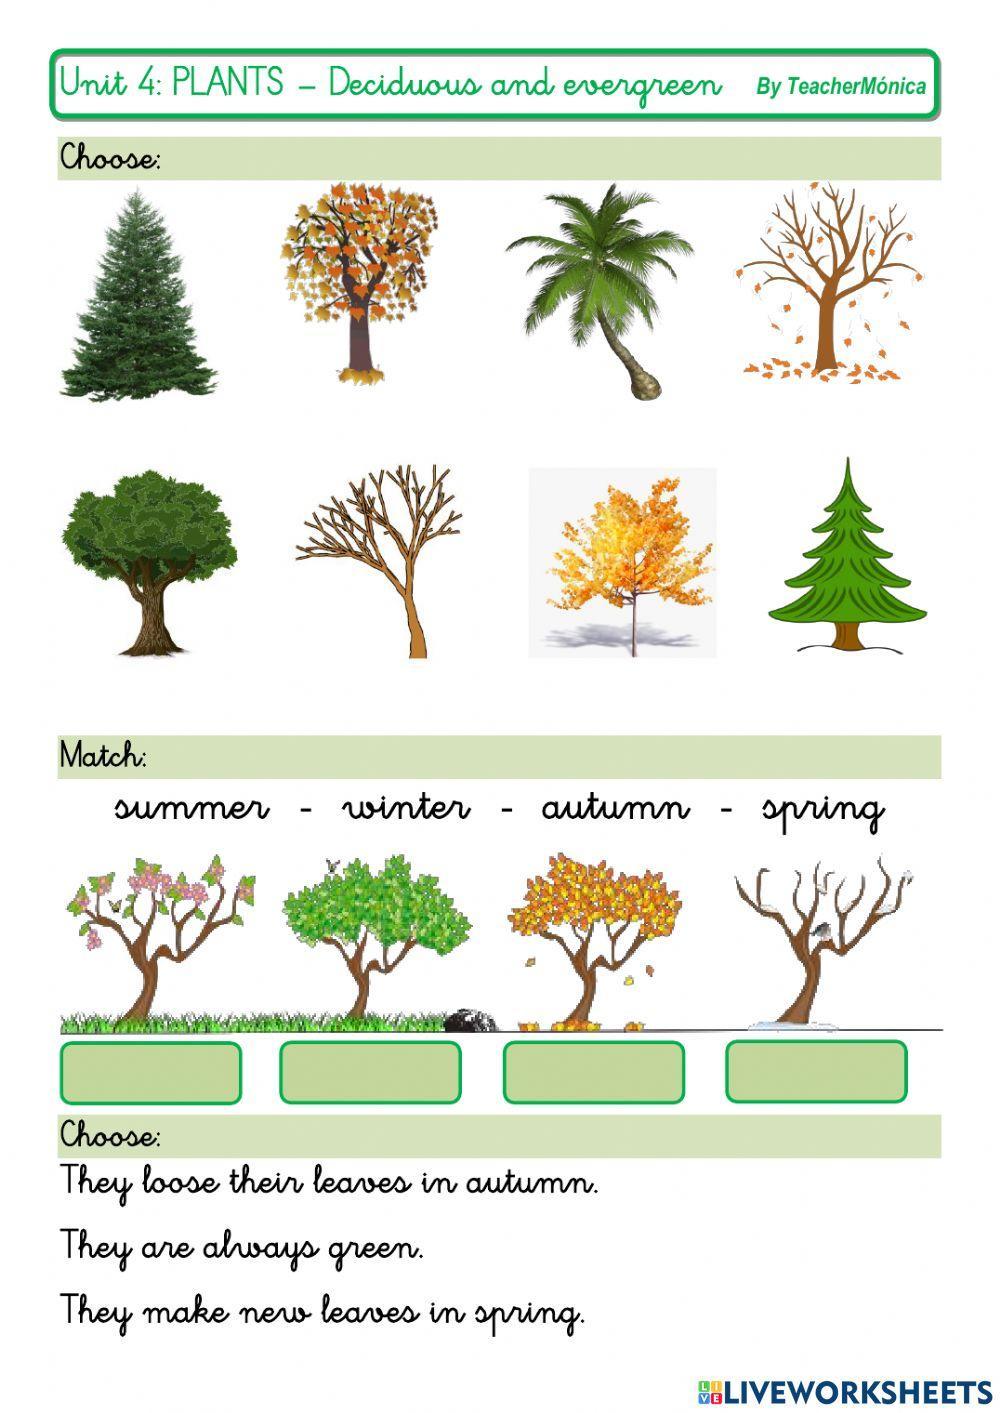 Deciduous and evergreen trees